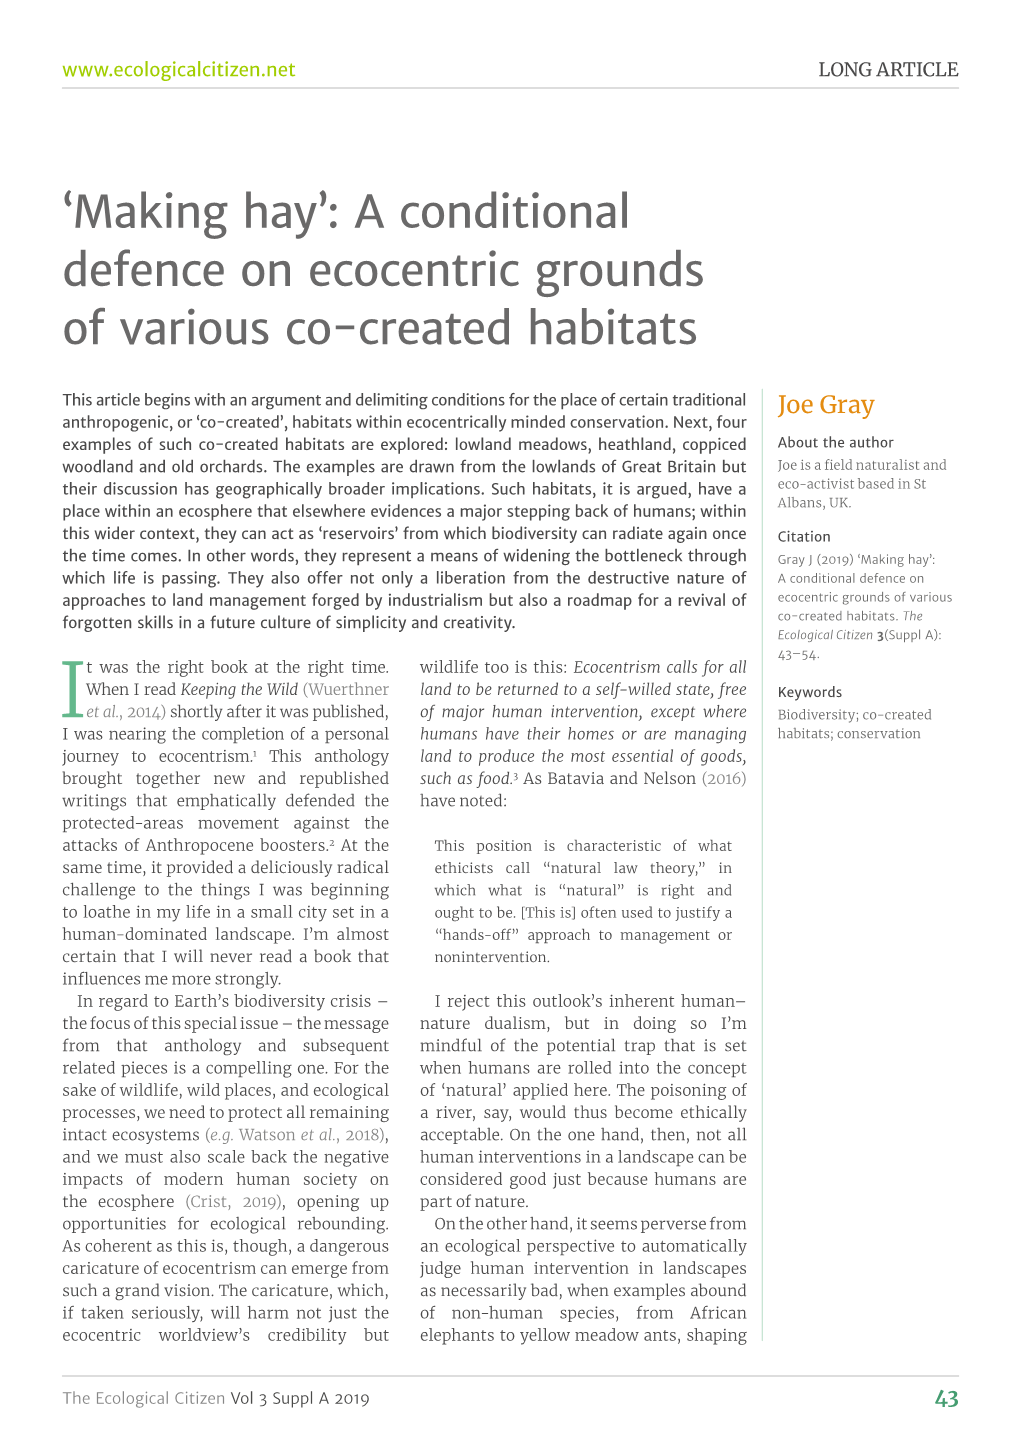 'Making Hay': a Conditional Defence on Ecocentric Grounds of Various Co